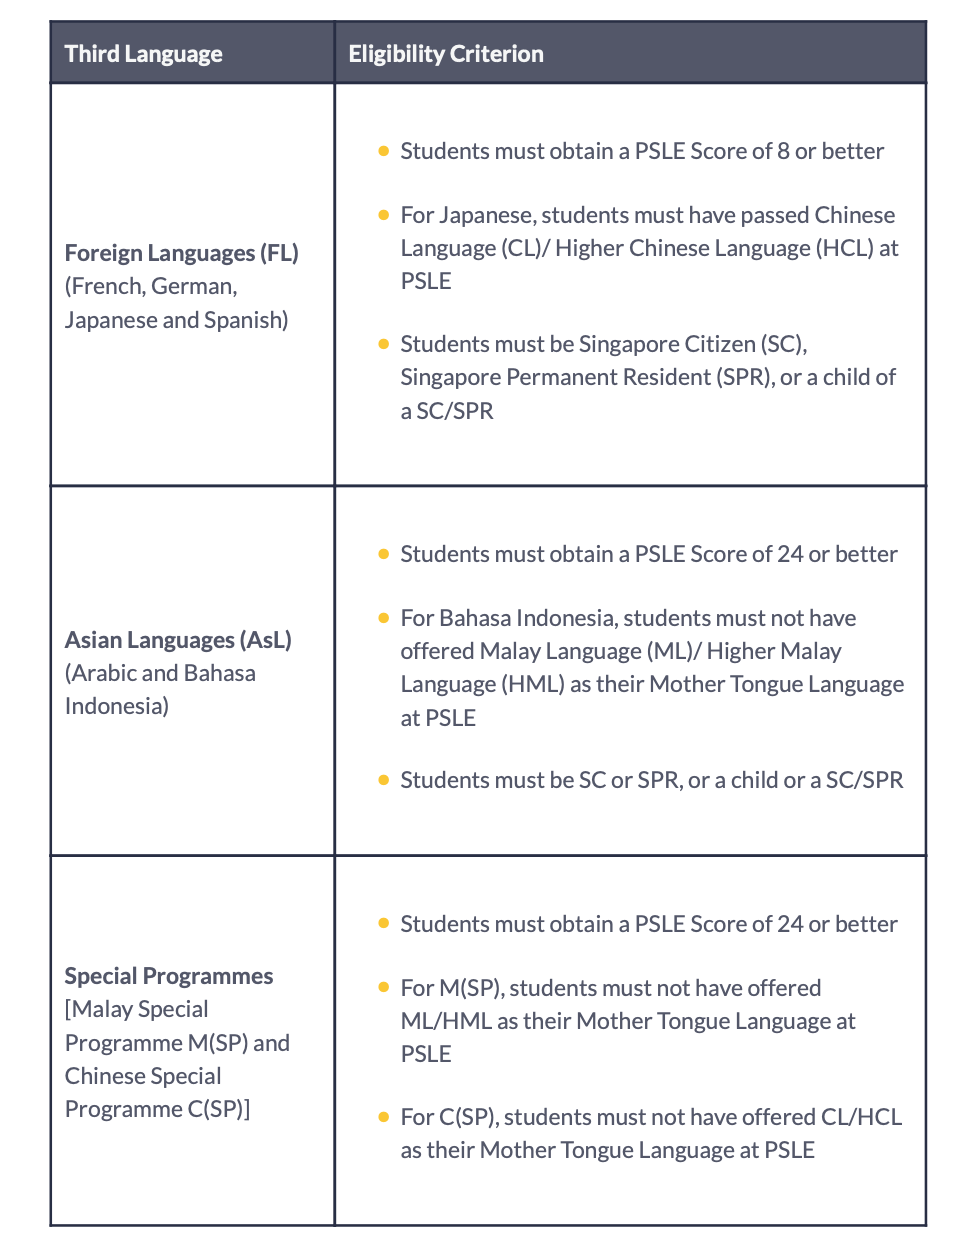 Qualifying for Higher Mother Tongue Language and Third Language